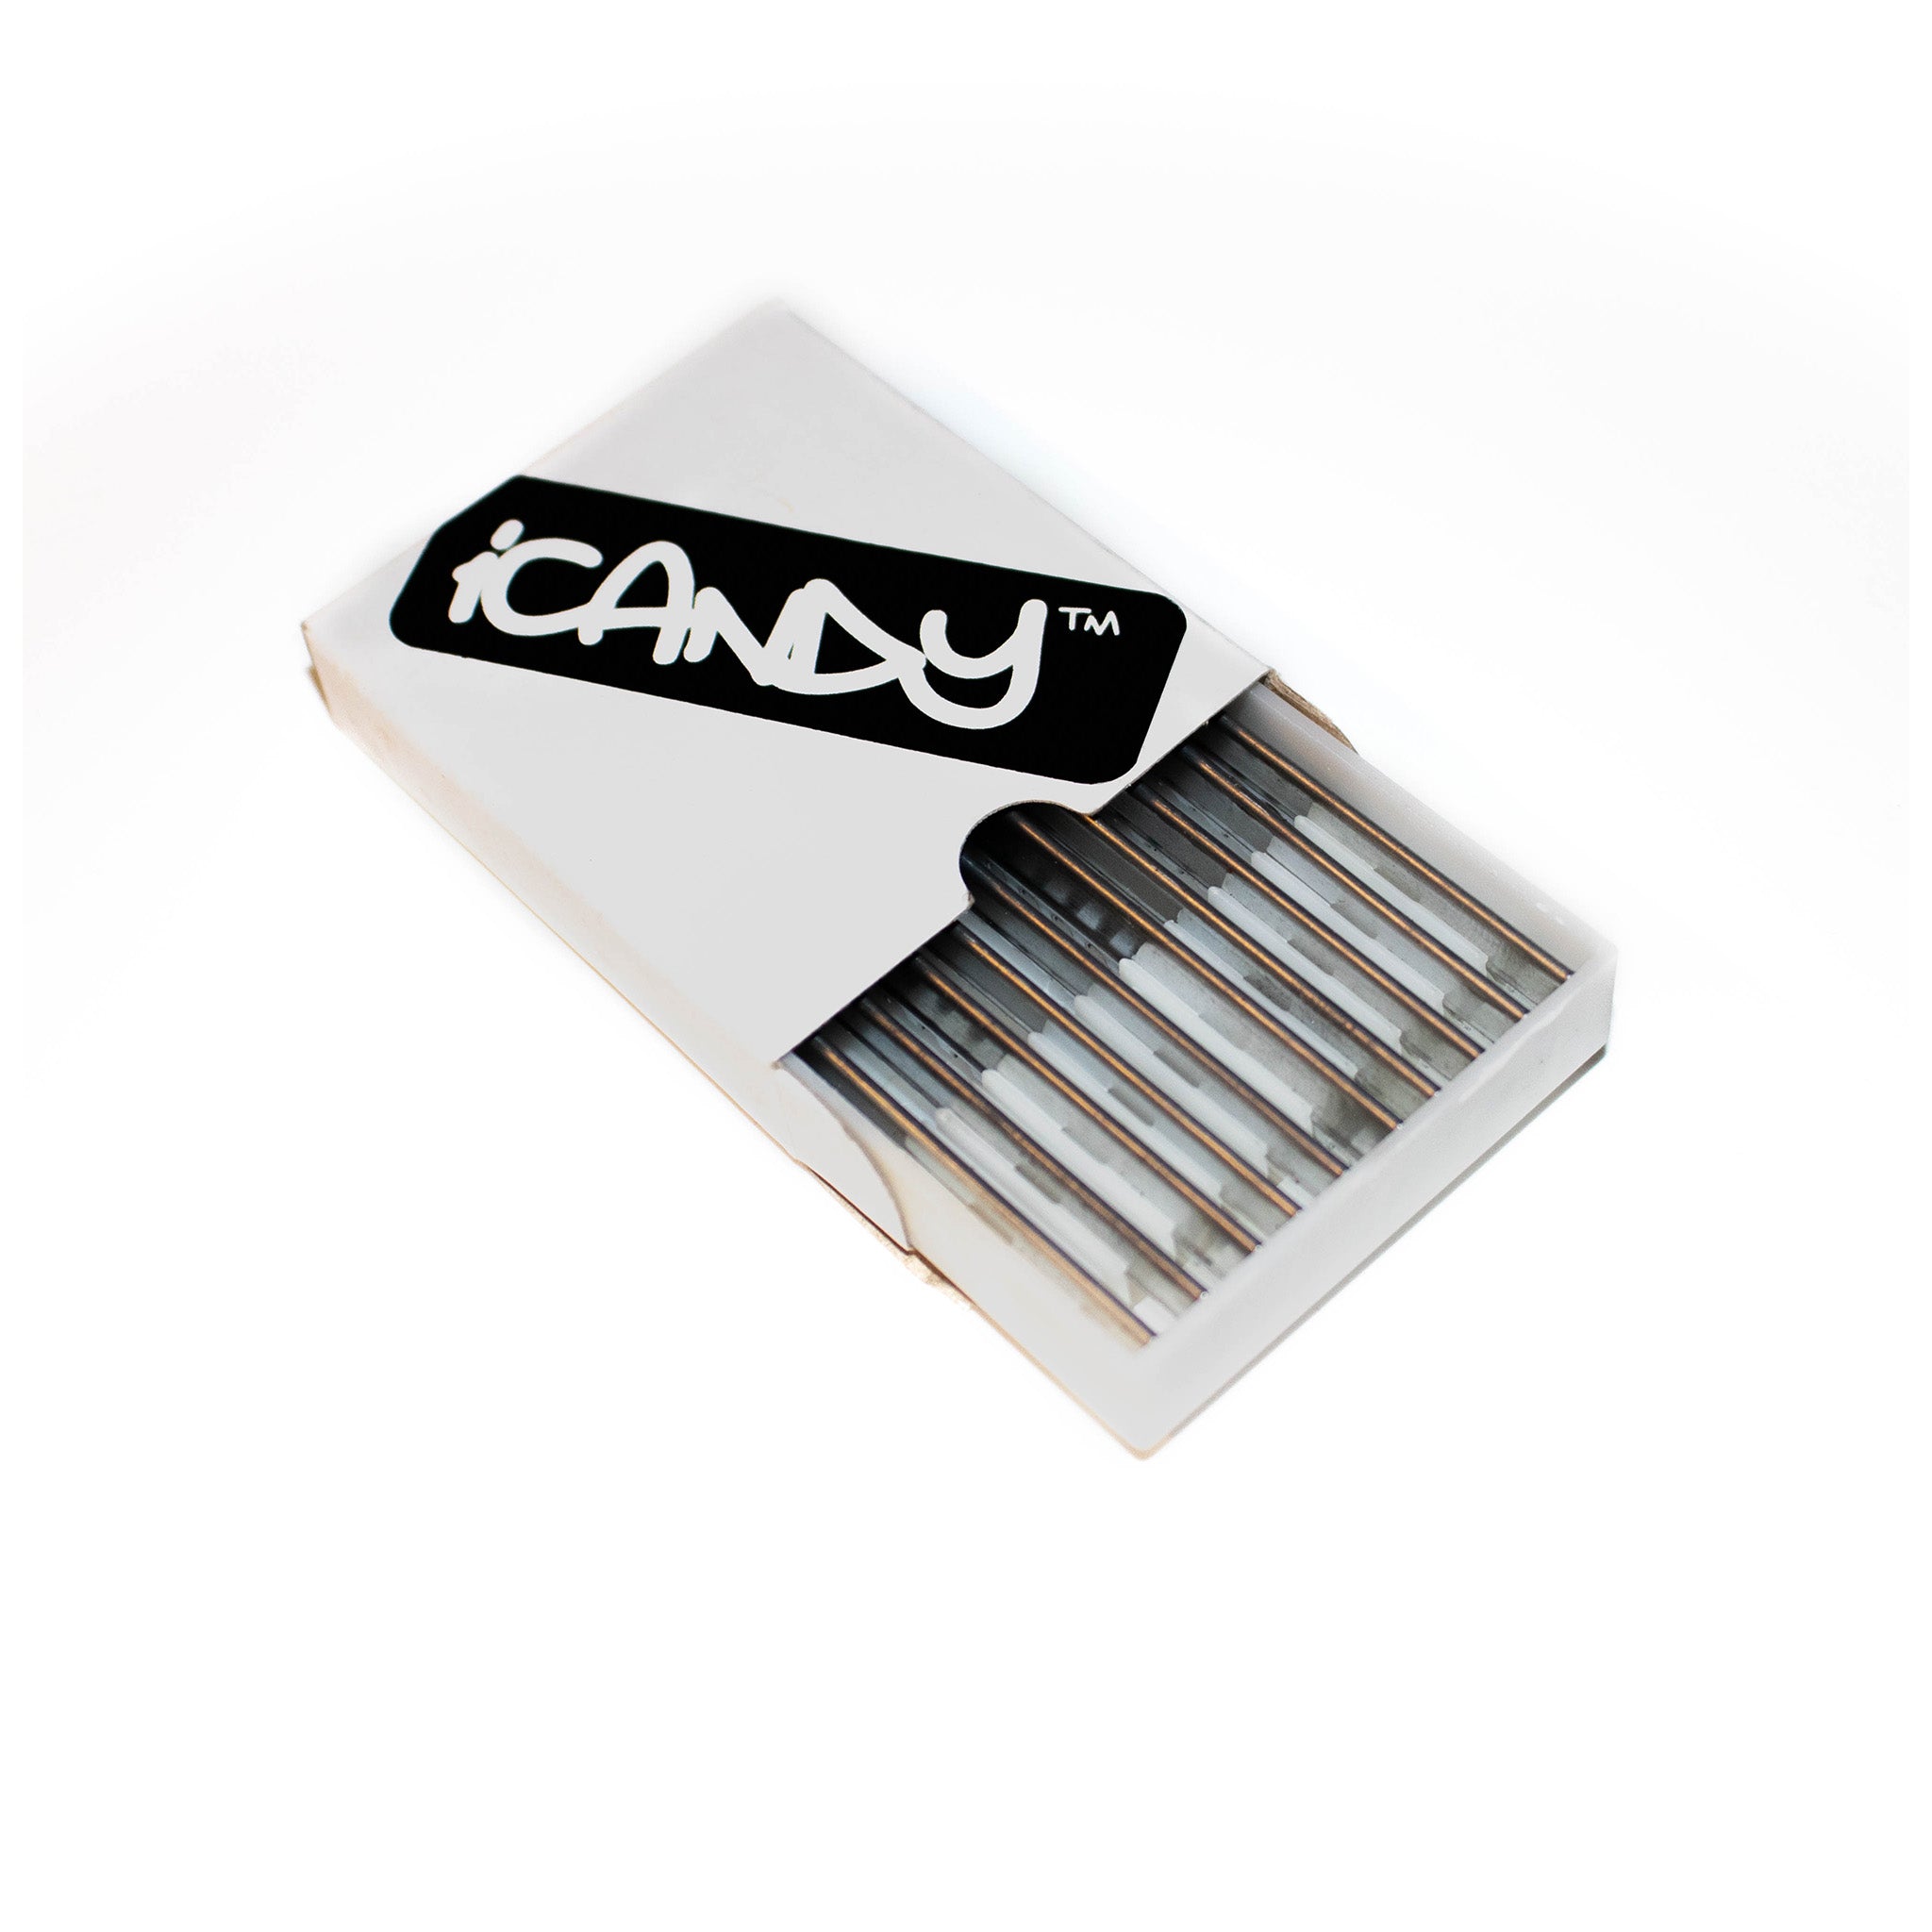 iCandy Feathering Razor Blades (10 pack)